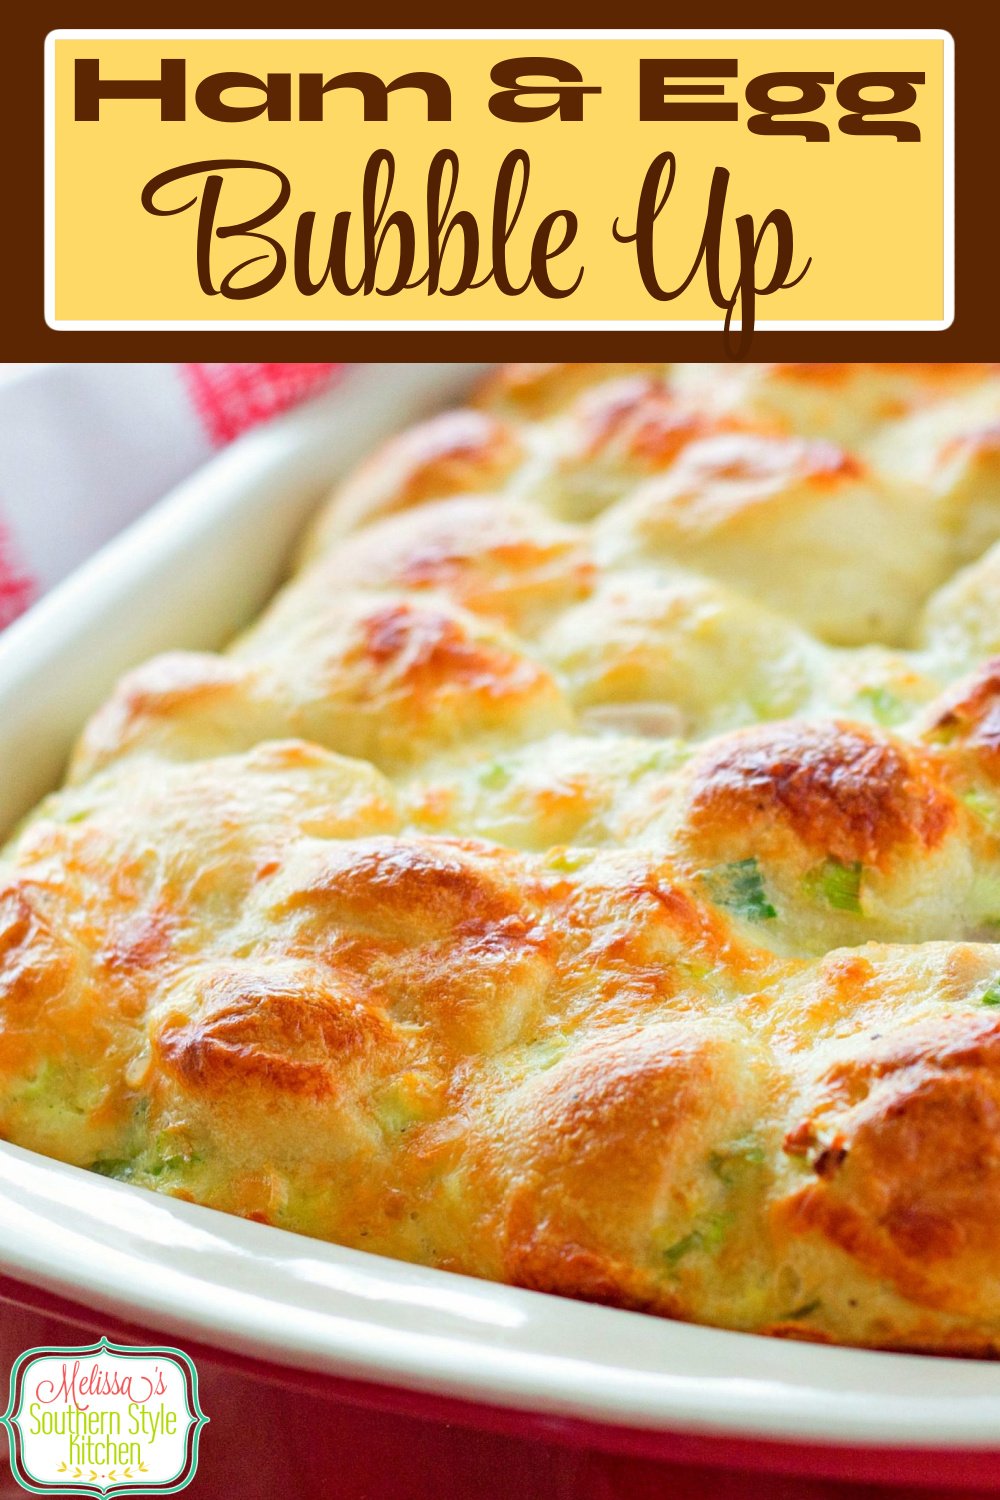 This delicious Ham and Egg Bubble Up is a spectacular start to any day #hamandeggs #bubbleup #hamandeggcasserole #breakfast #brunch #breakfastcasserole #eggs #leftoverham #dinner ideas #holidaybrunch #Christmasbrunch #southernfood #southernrecipes via @melissasssk